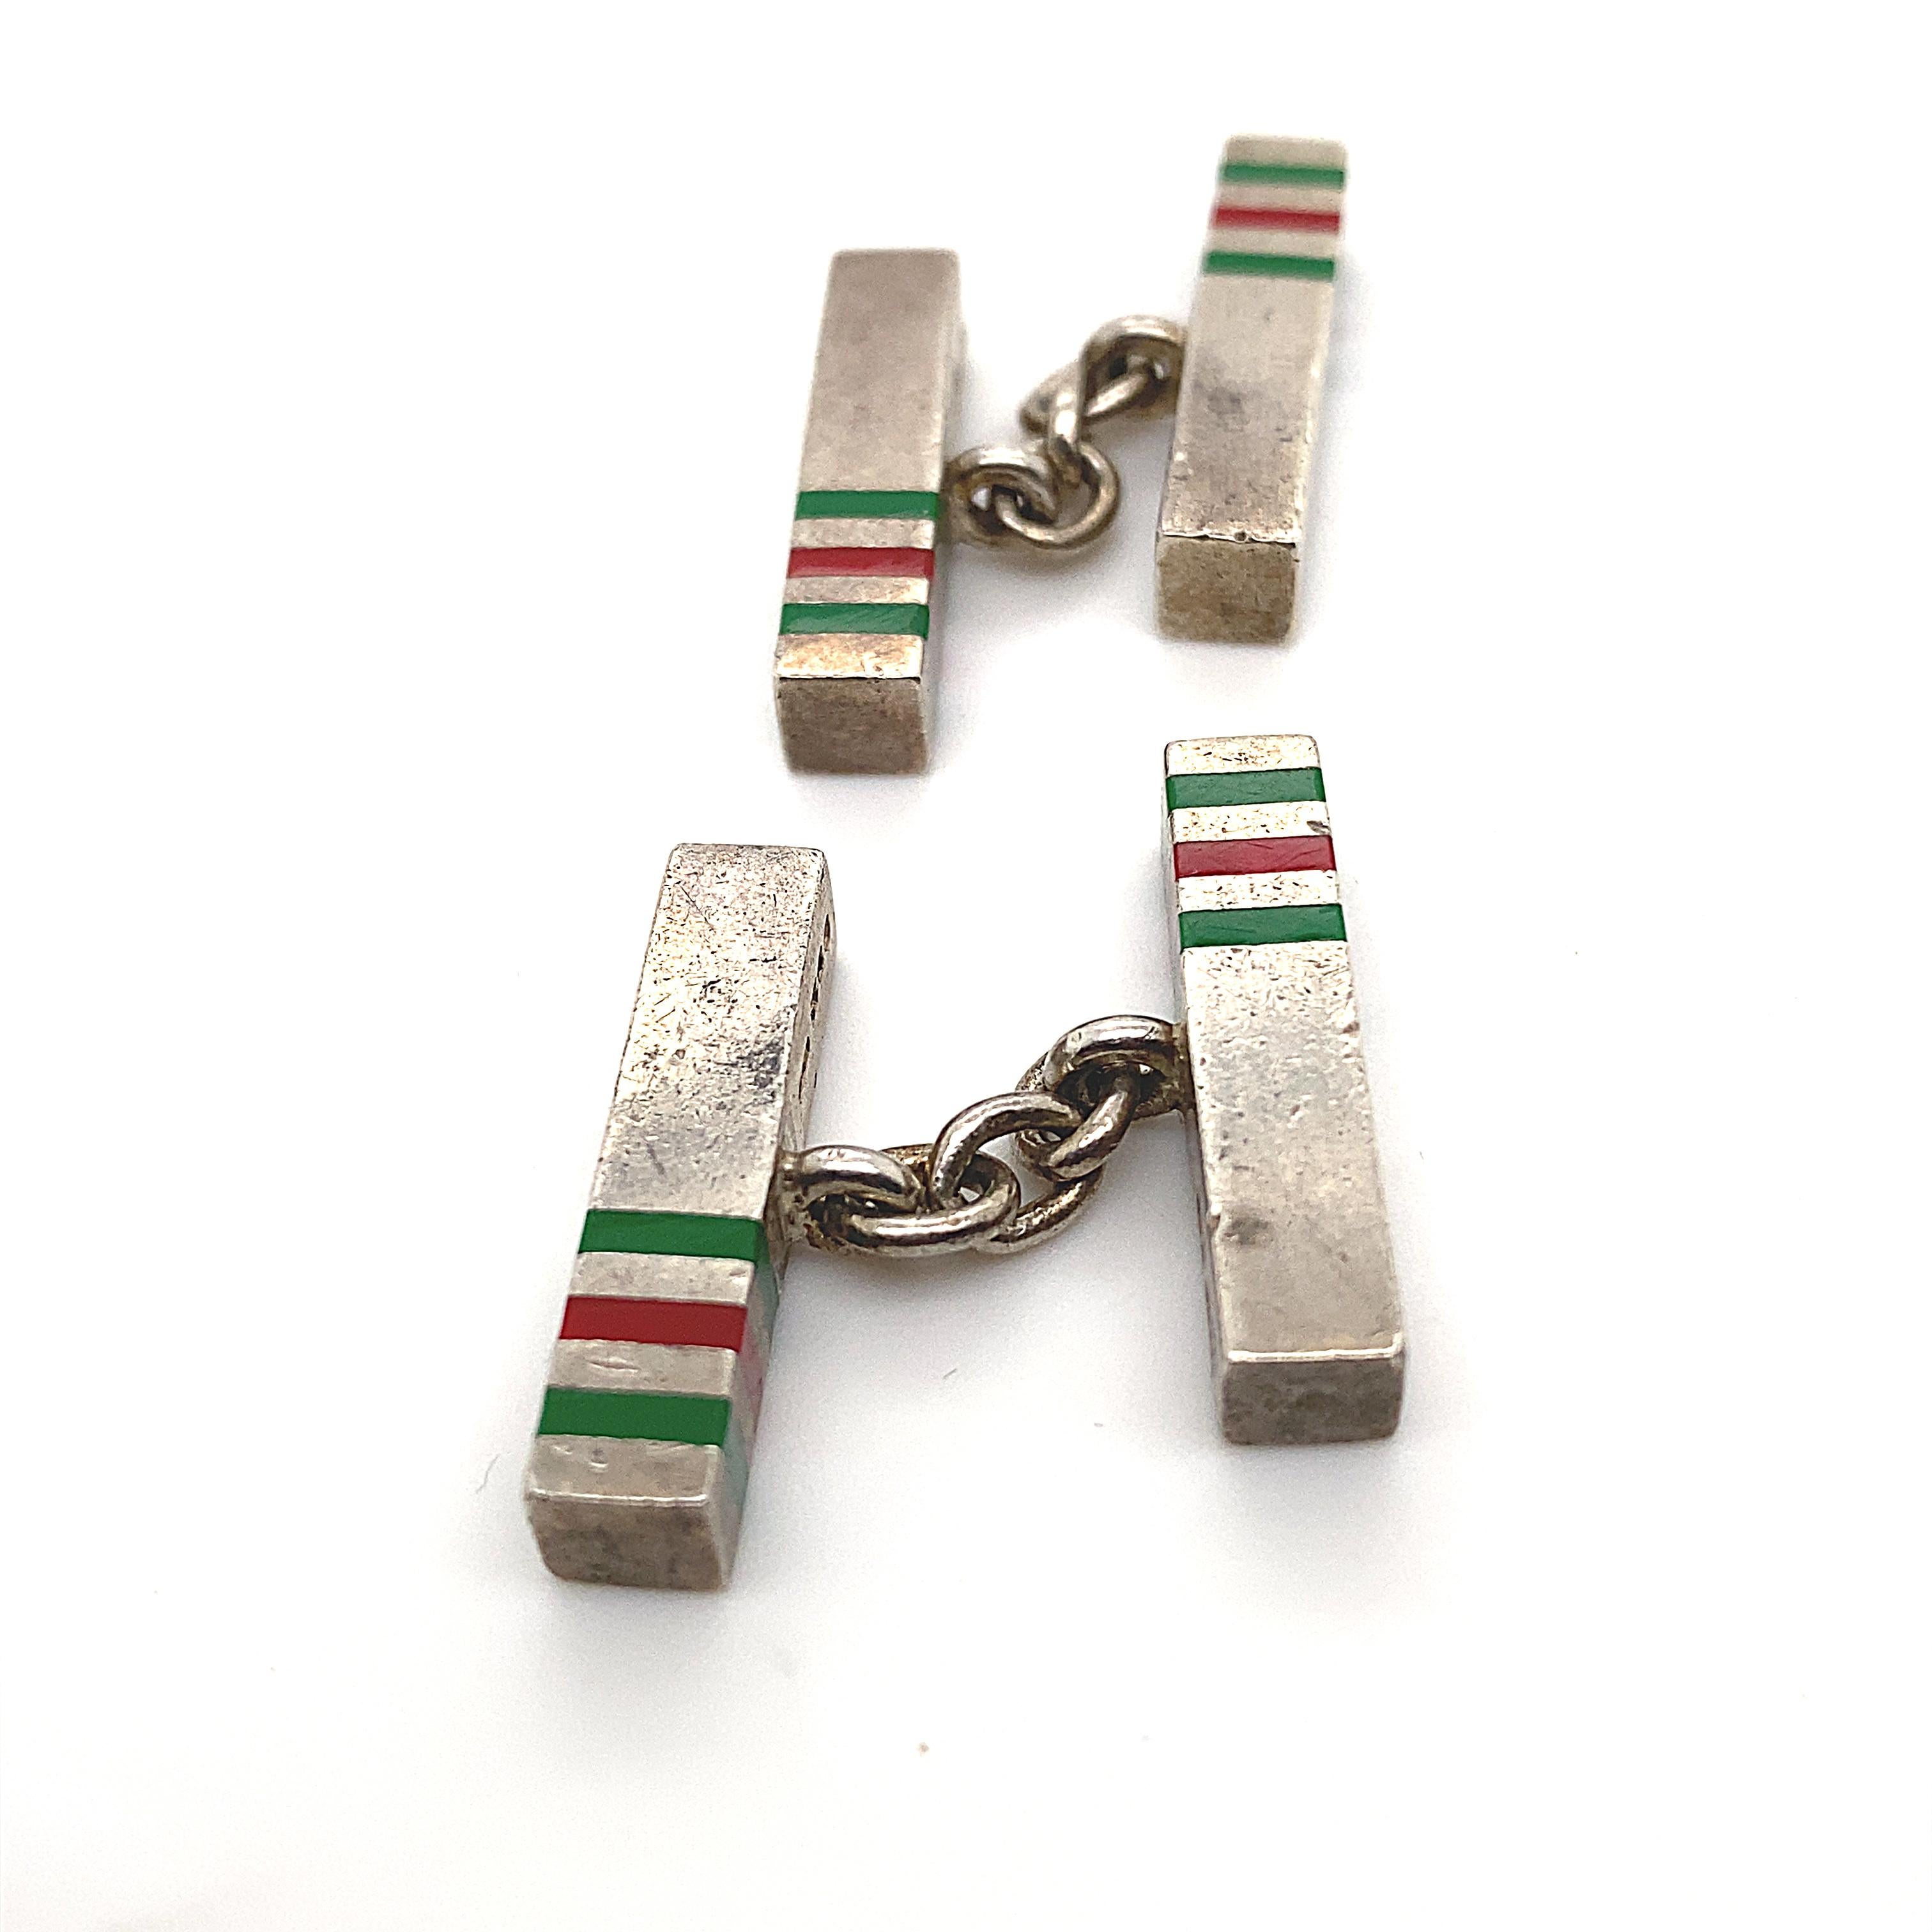 A retro pair of silver and enamel Gucci cuff links, circa 1990.

These classic vintage cuff links are designed as a matching pair of rectangular batons each featuring Gucci's iconic red and green stripes.

In 1964, Gucci introduced a version of its